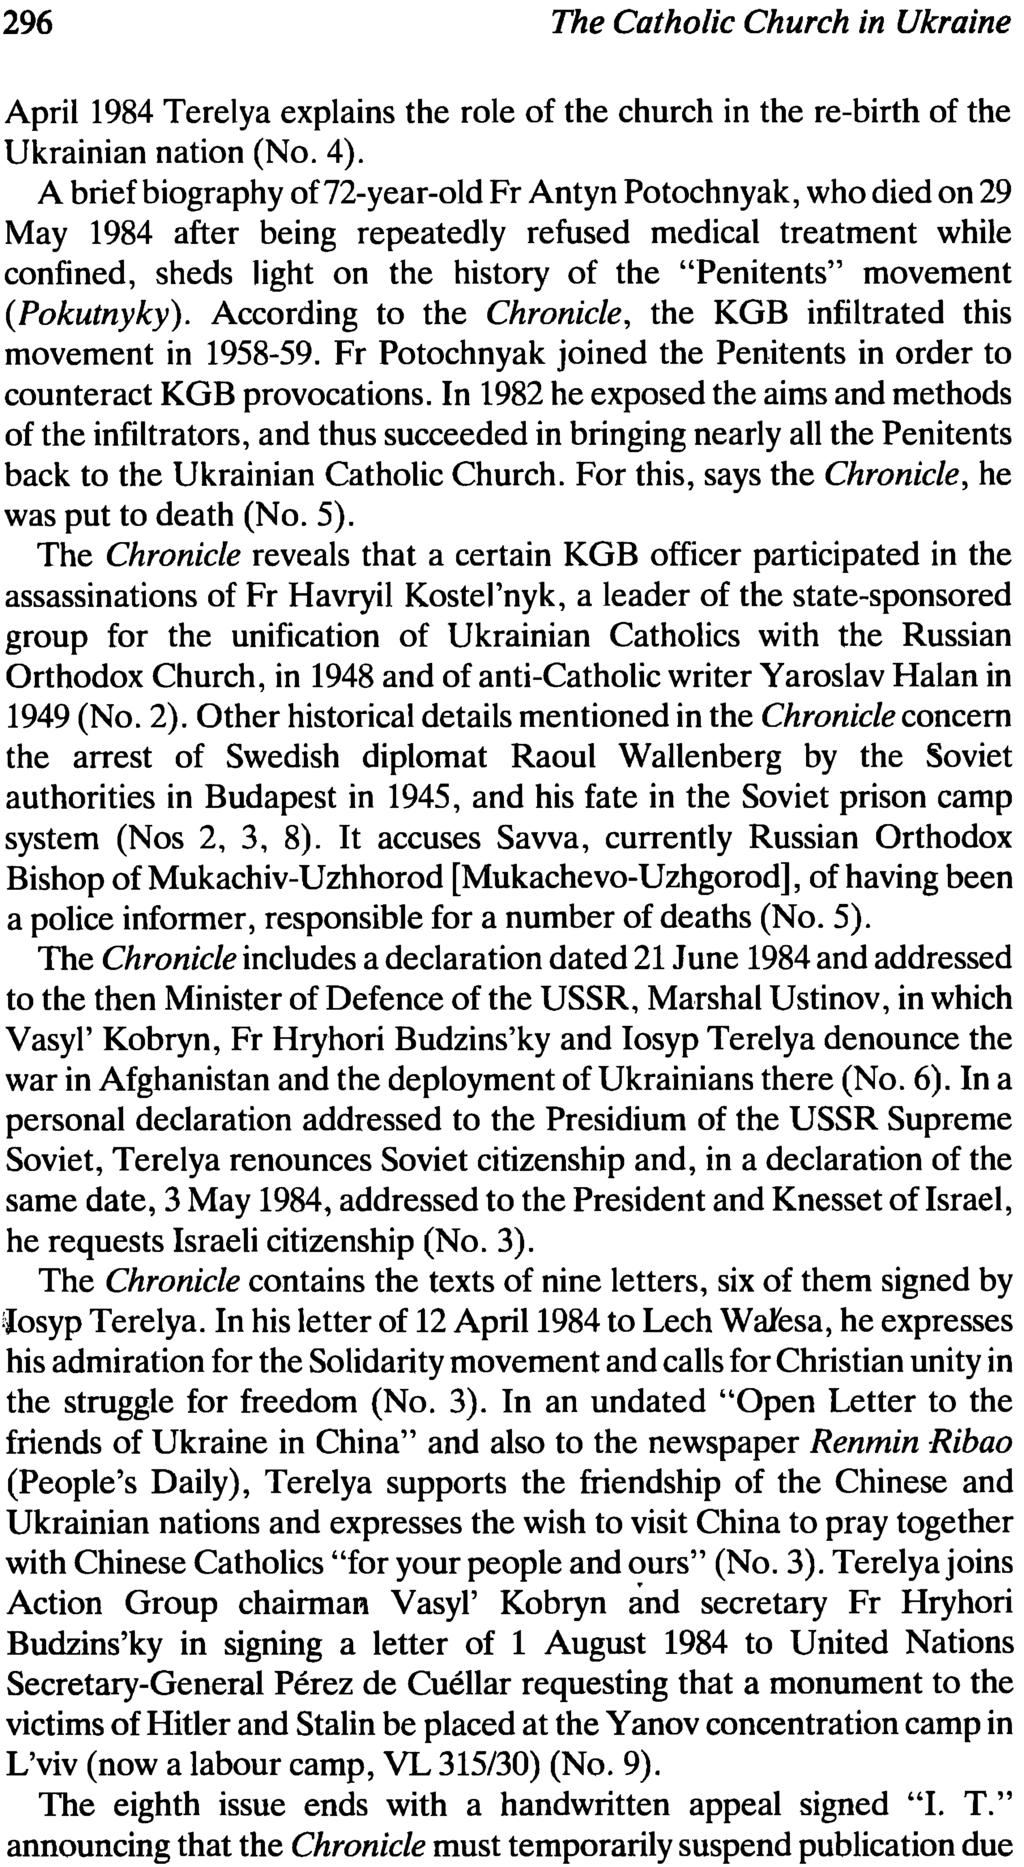 296 The Catholic Church in Ukraine April 1984 Terelya explains the role of the church in the recbirth of the Ukrainian nation (No. 4).